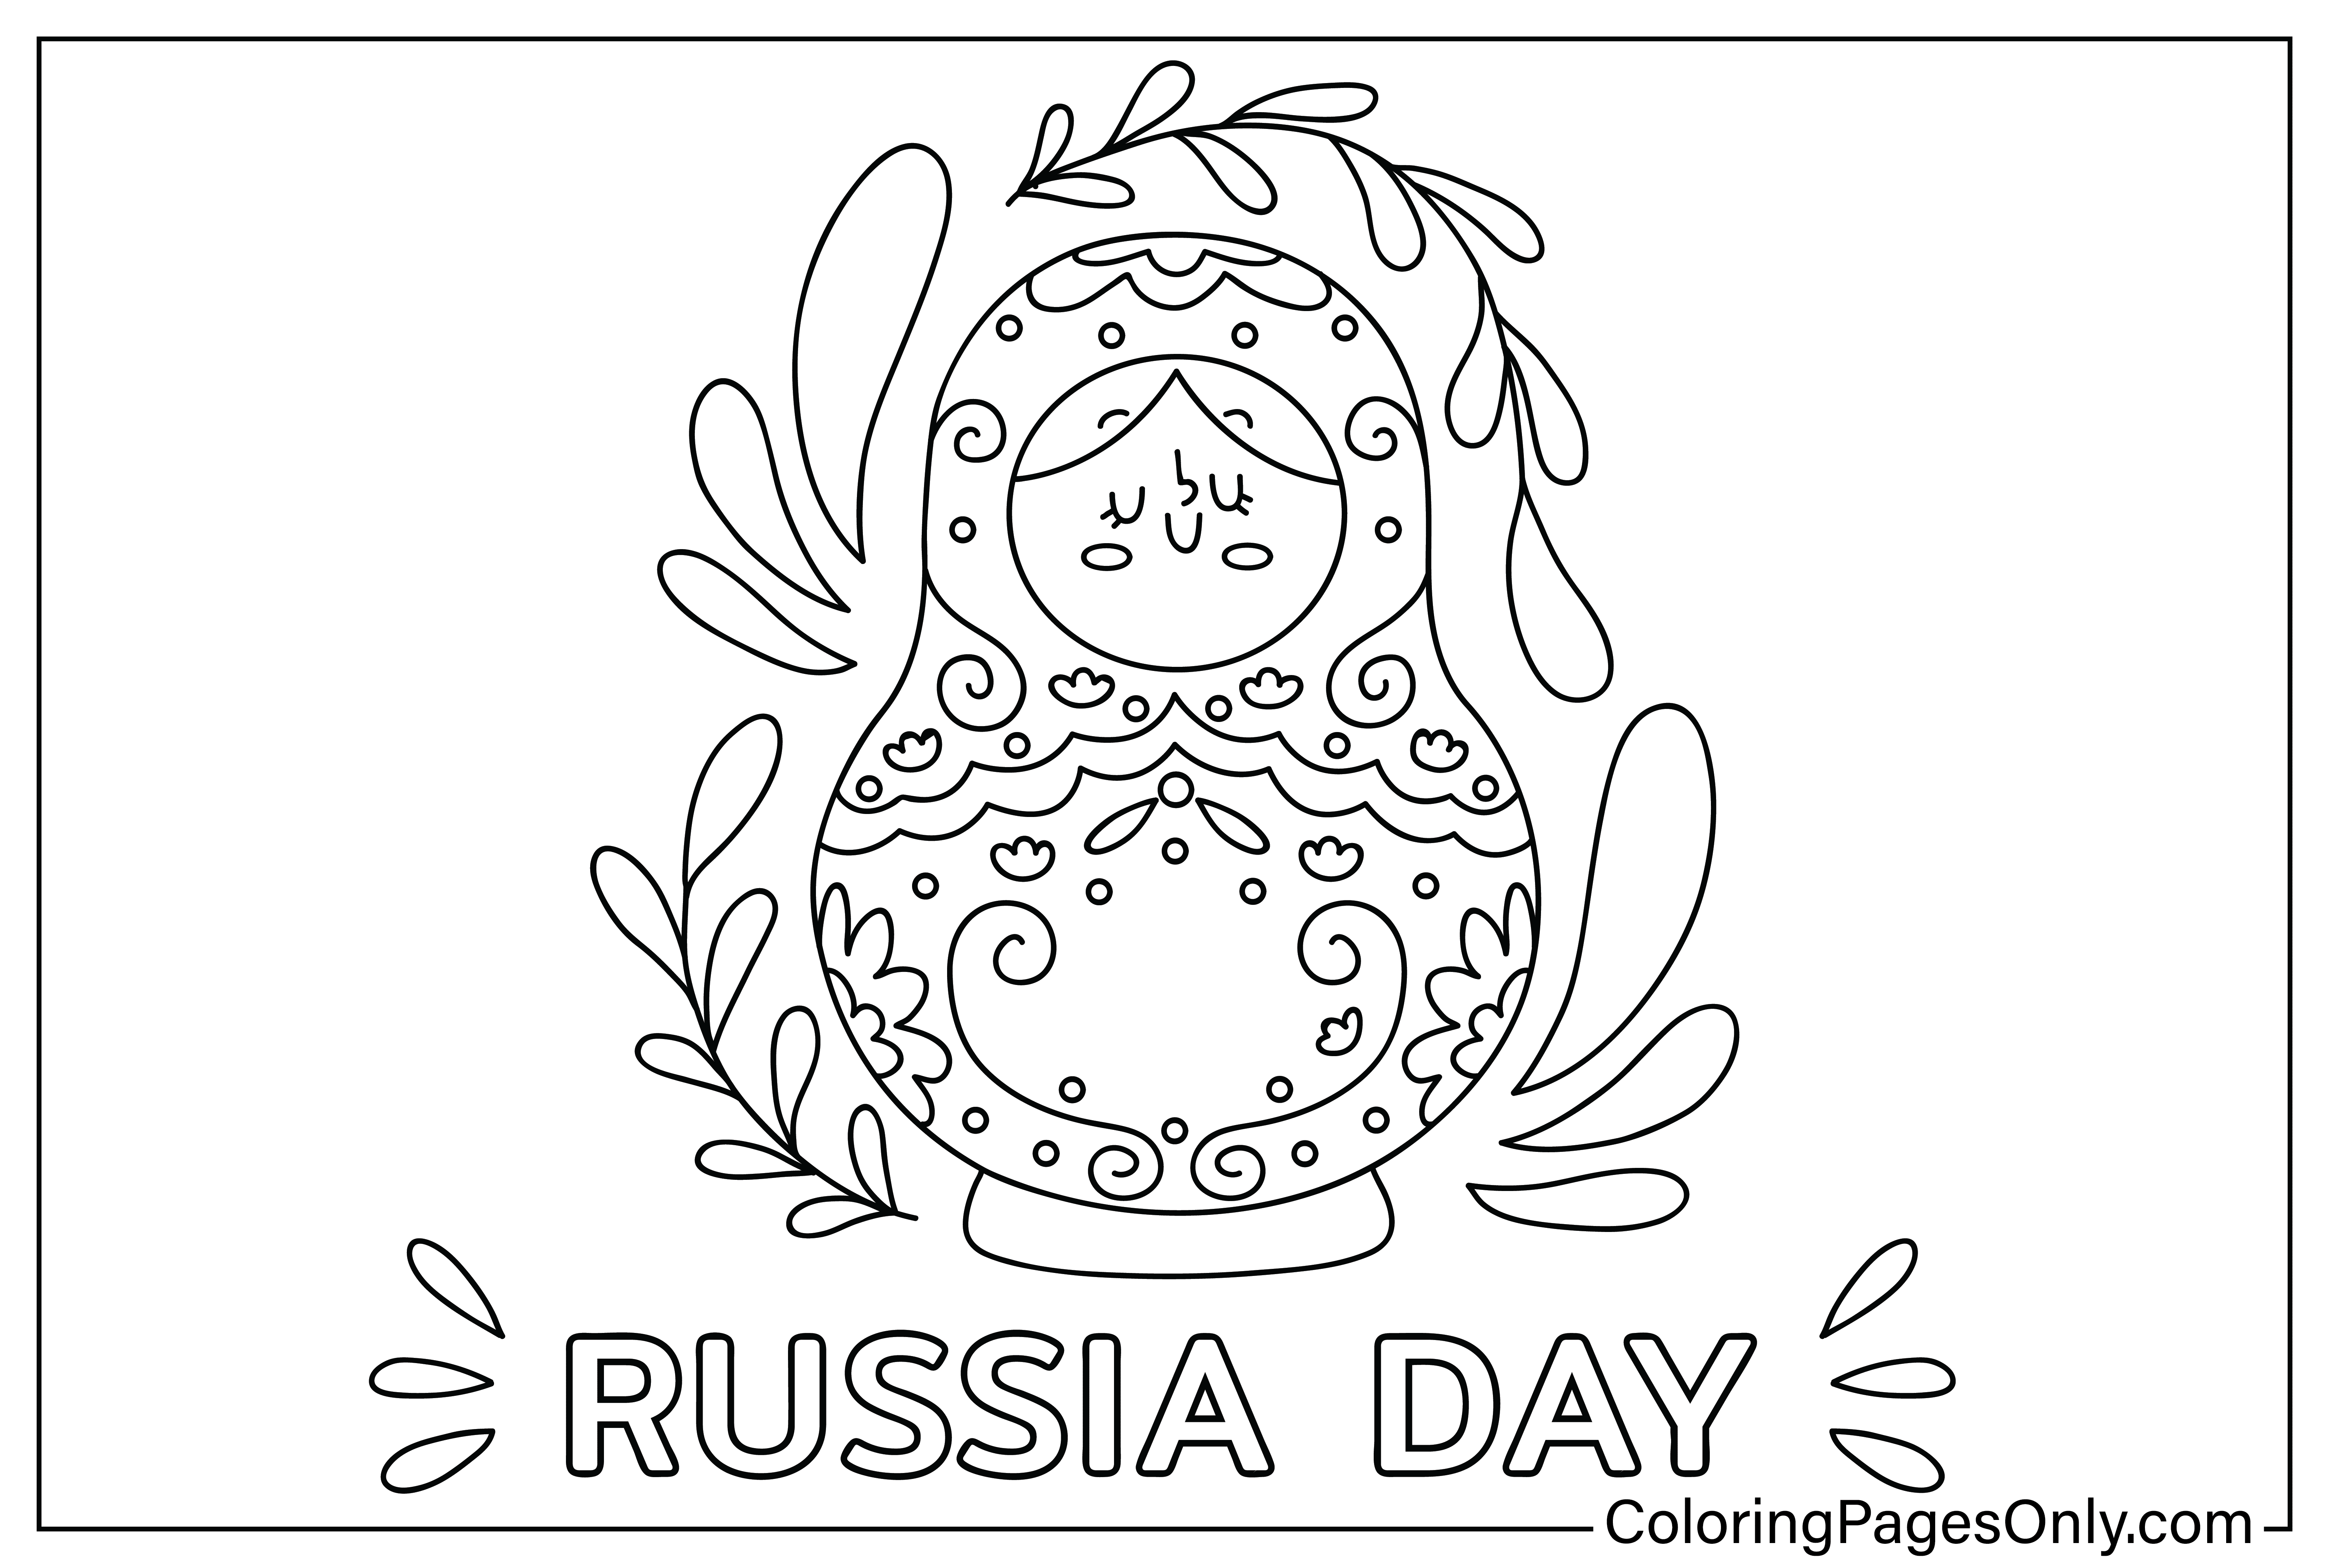 Russia Day Coloring Page from Russia